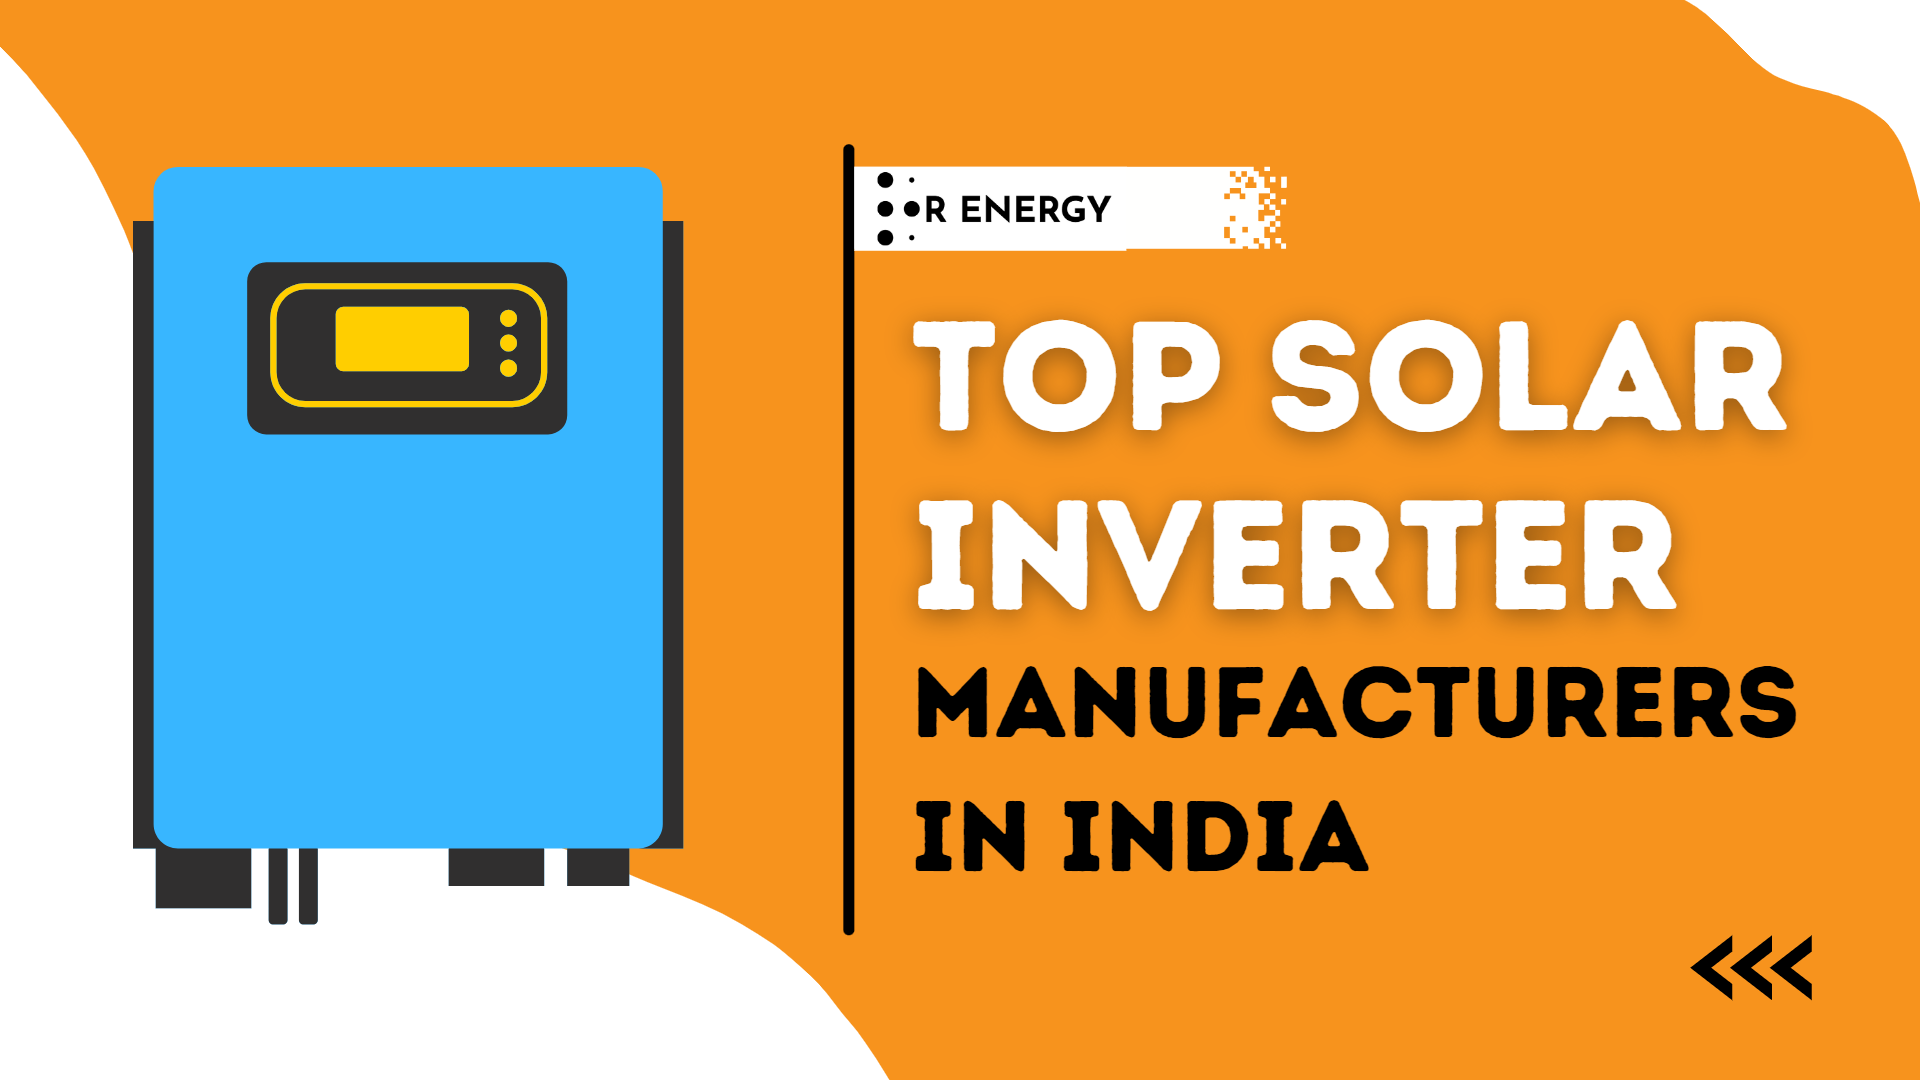 https://renergyinfo.com/top-10-solar-inverter-manufacturing-companies-in-india/